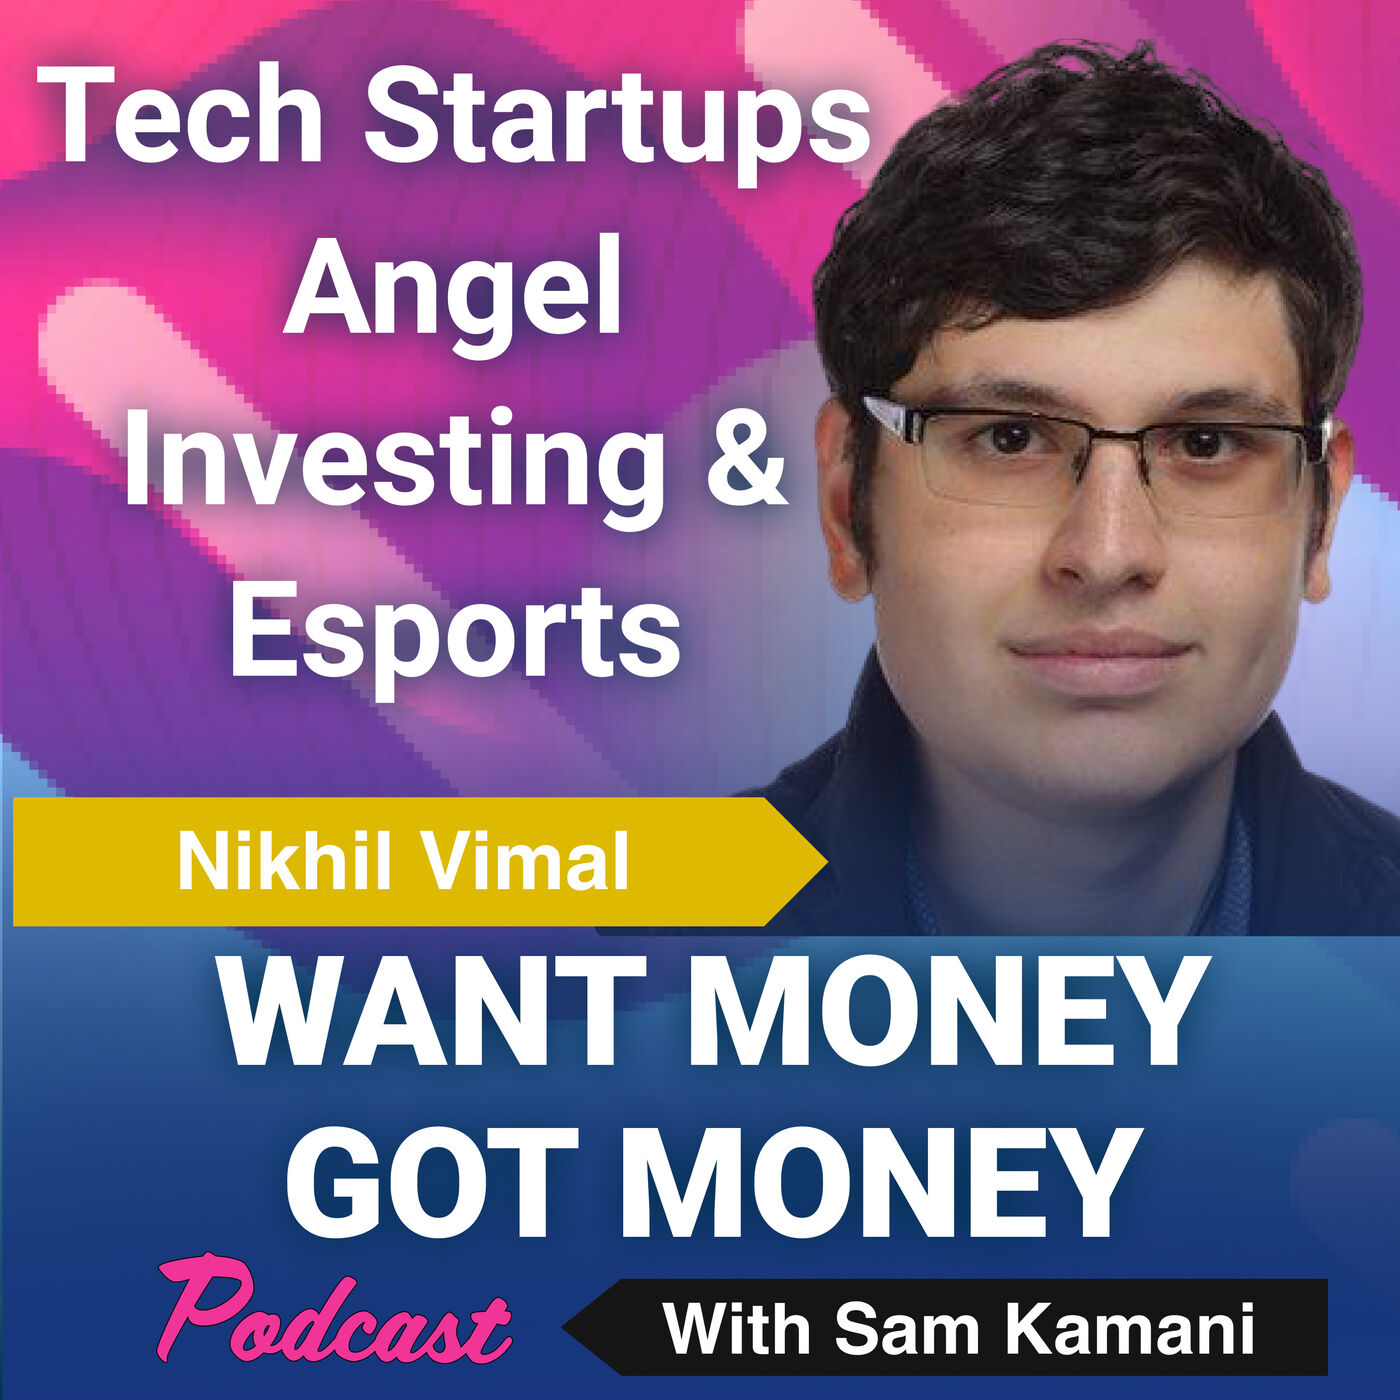 Ep:73 From chatbots to Angel investing in eSports with guest speaker - Nikhil Vimal